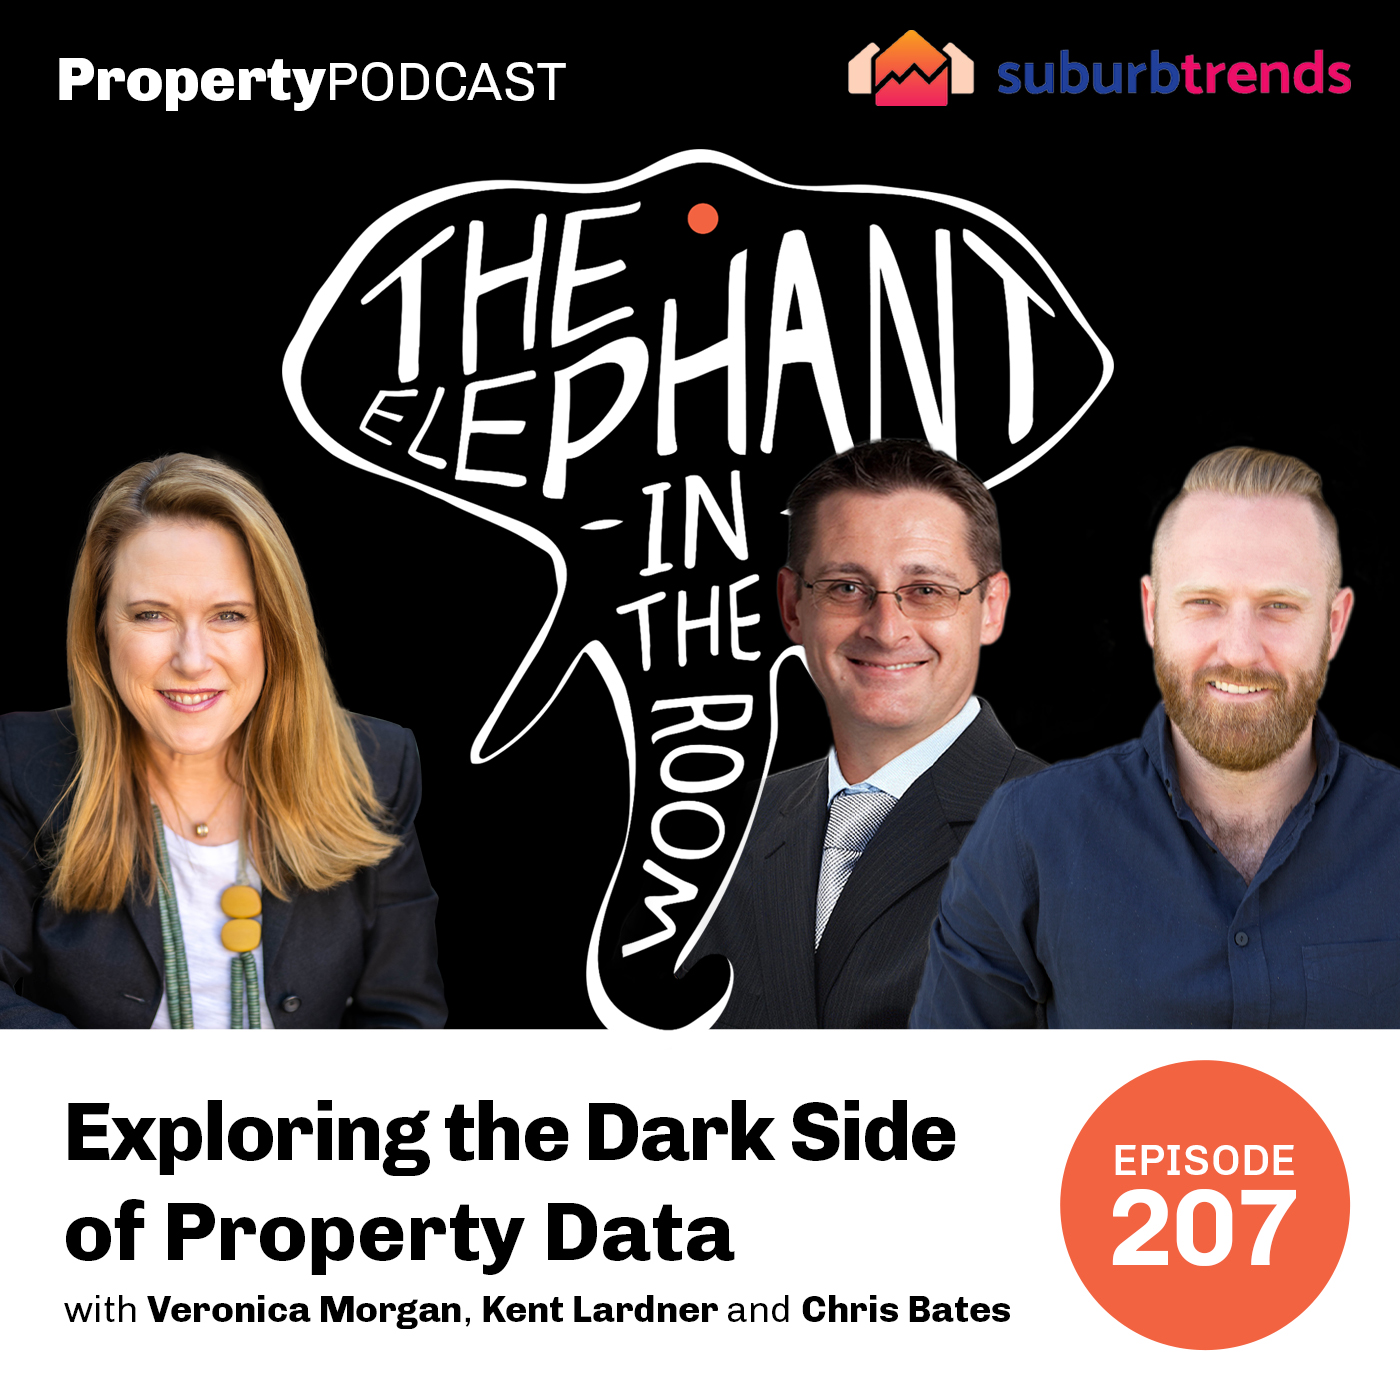 Suburb Trends December 2021 | Exploring the Dark Side of Property Data